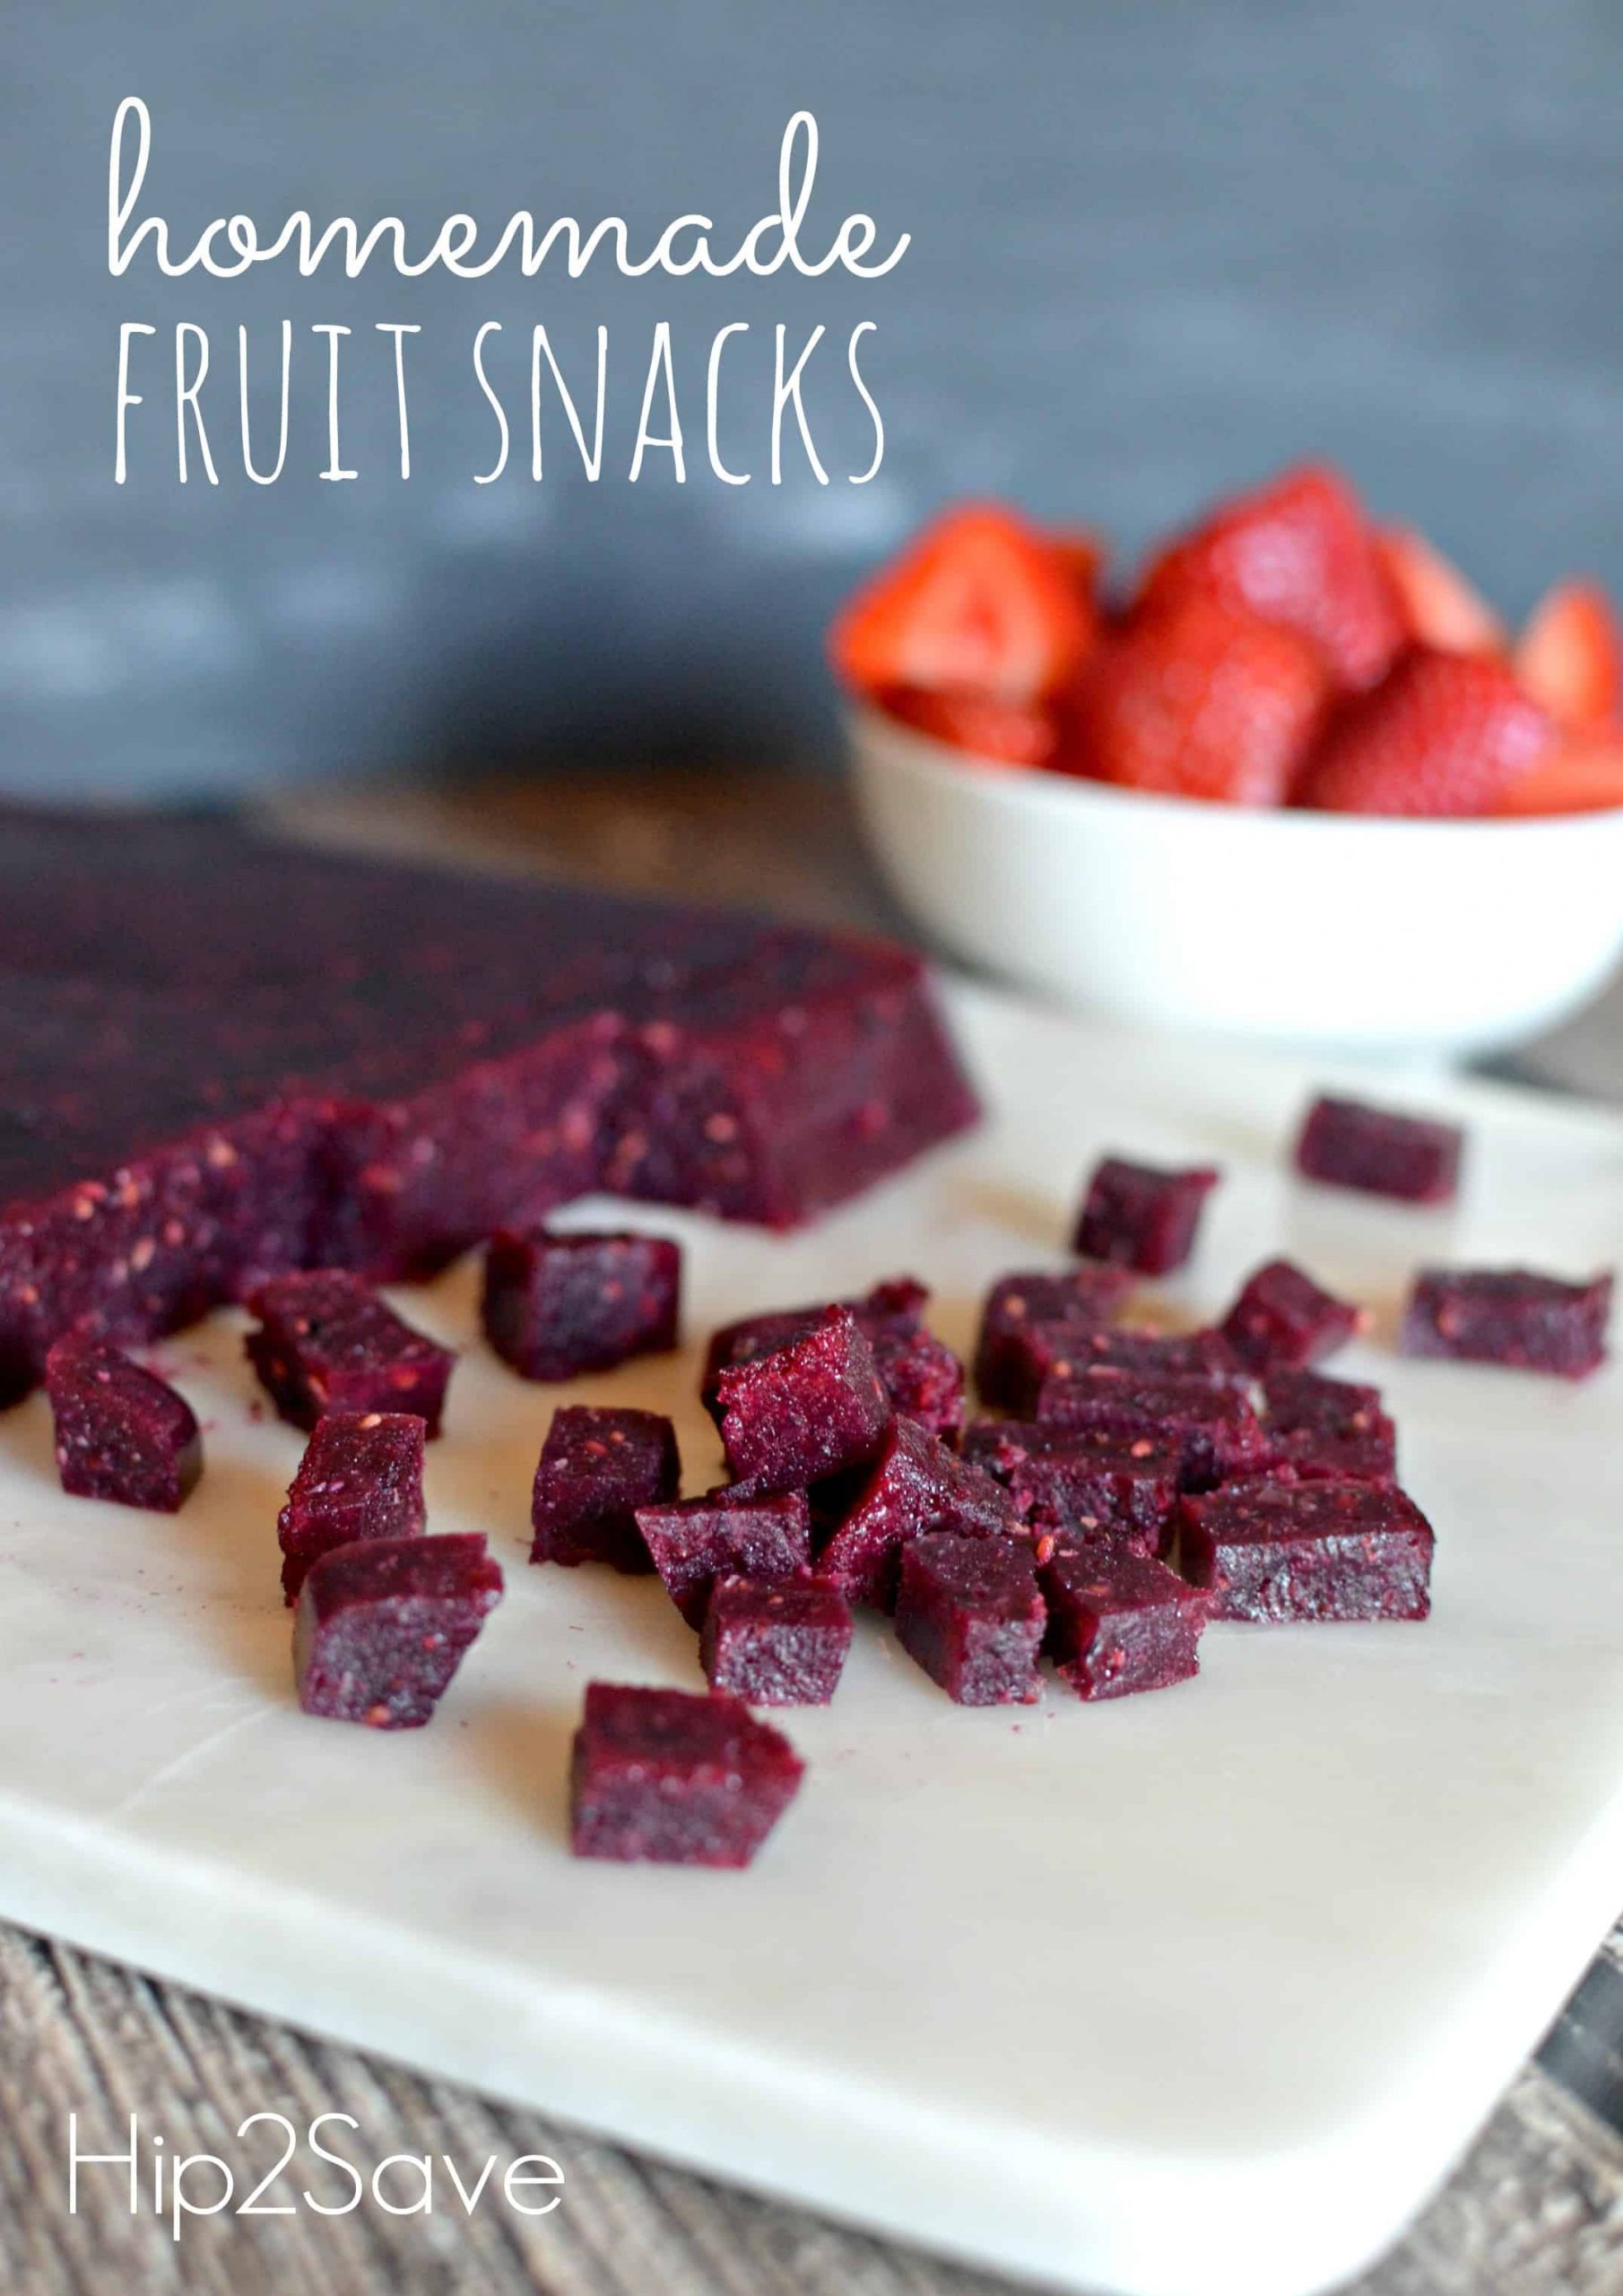 Fruity Snacks Recipes
 15 Homemade Fruit Chew Recipes That are Great for School